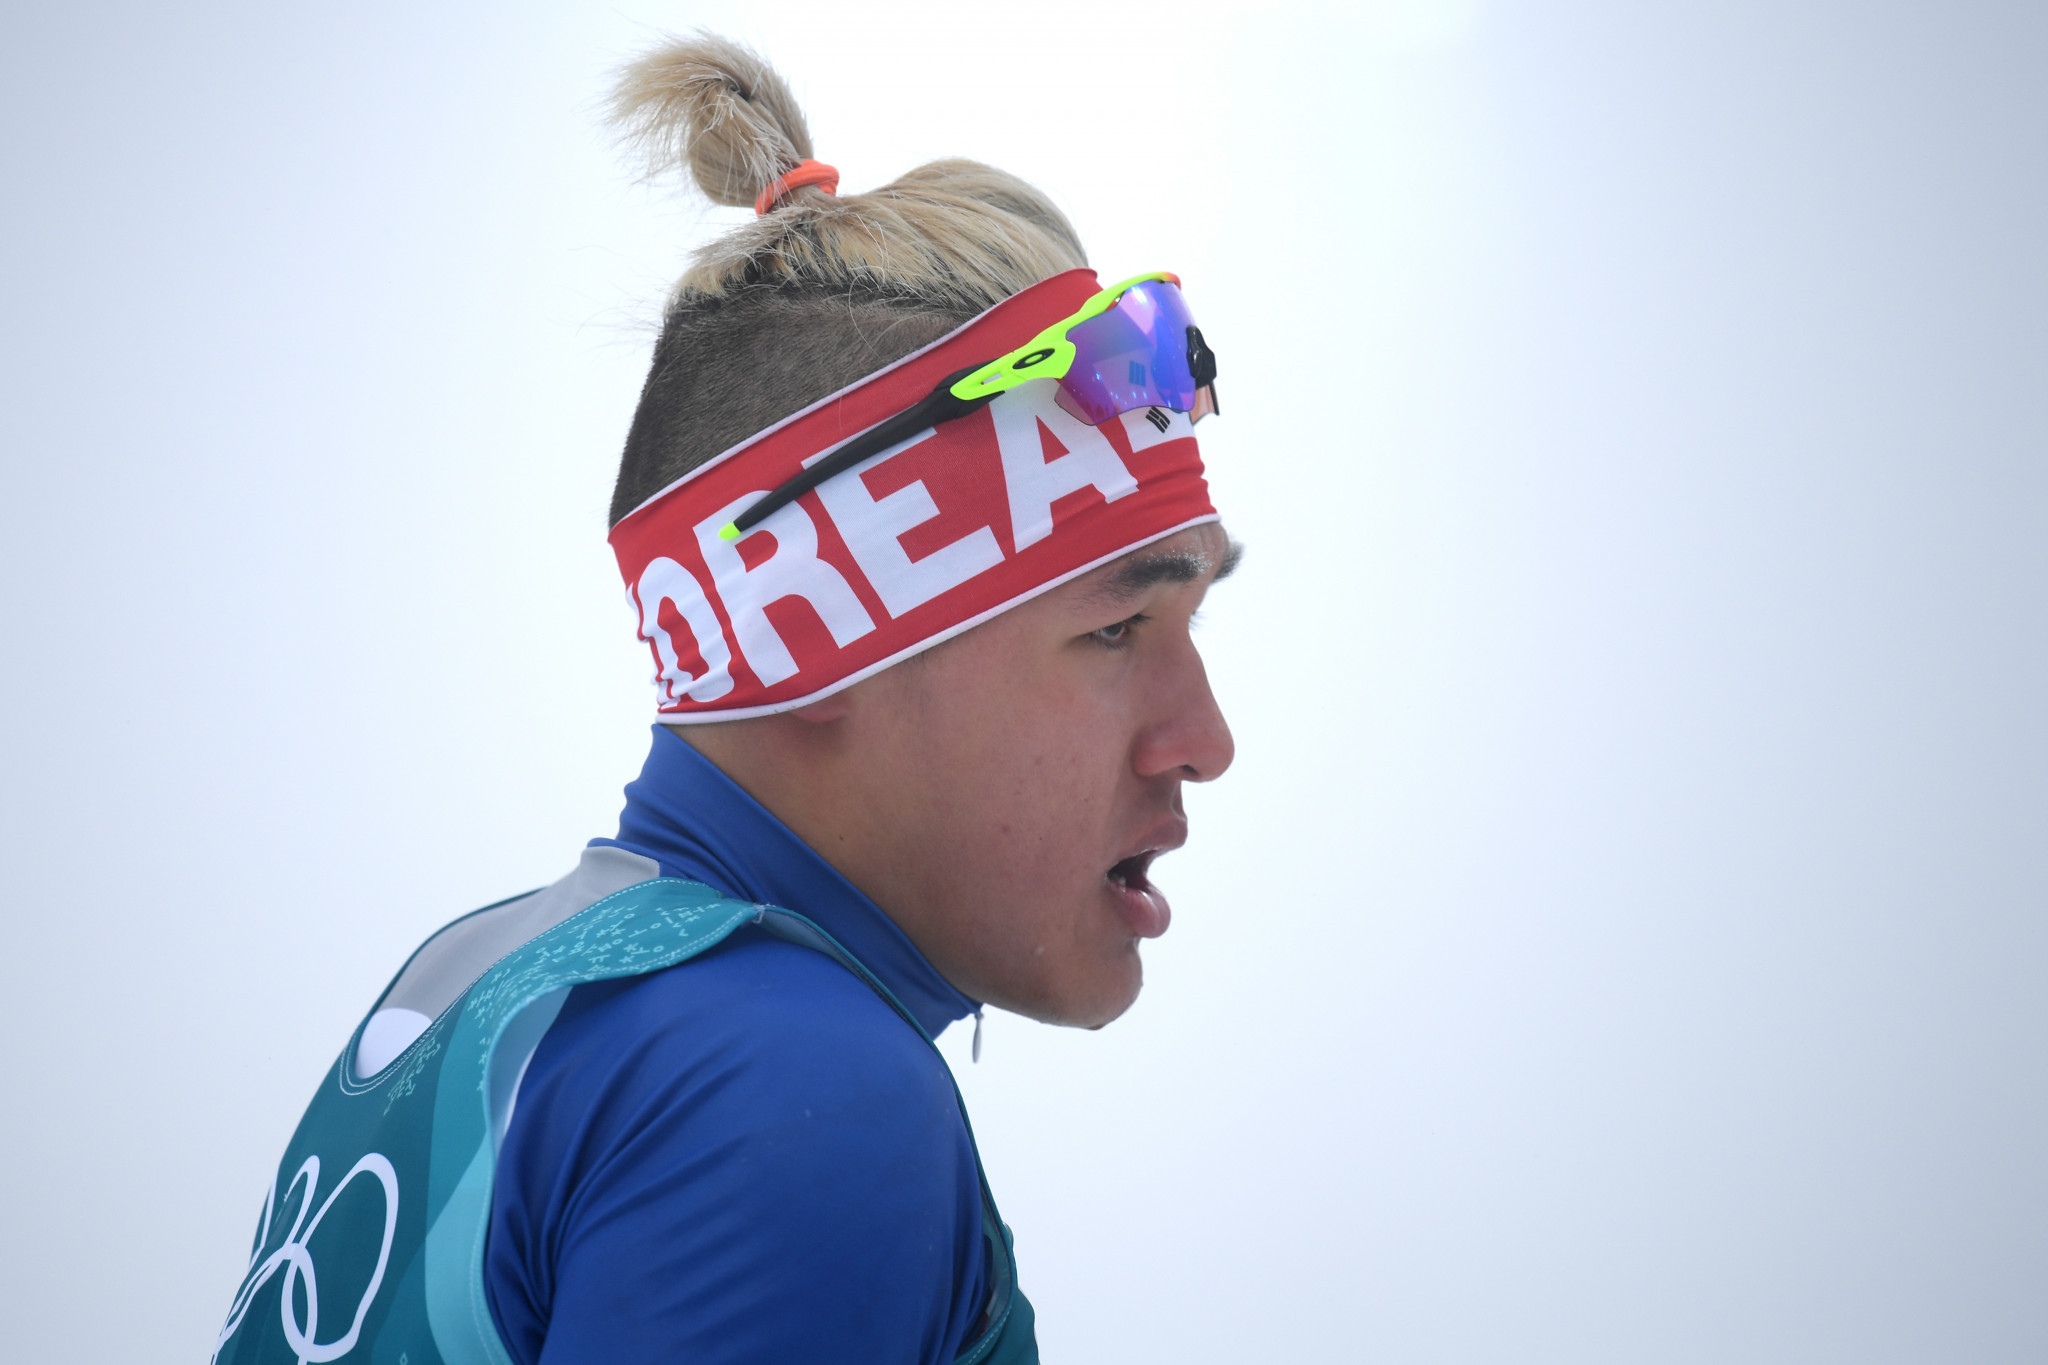 South Korean cross-country skier defends decision to switch allegiance to Norway